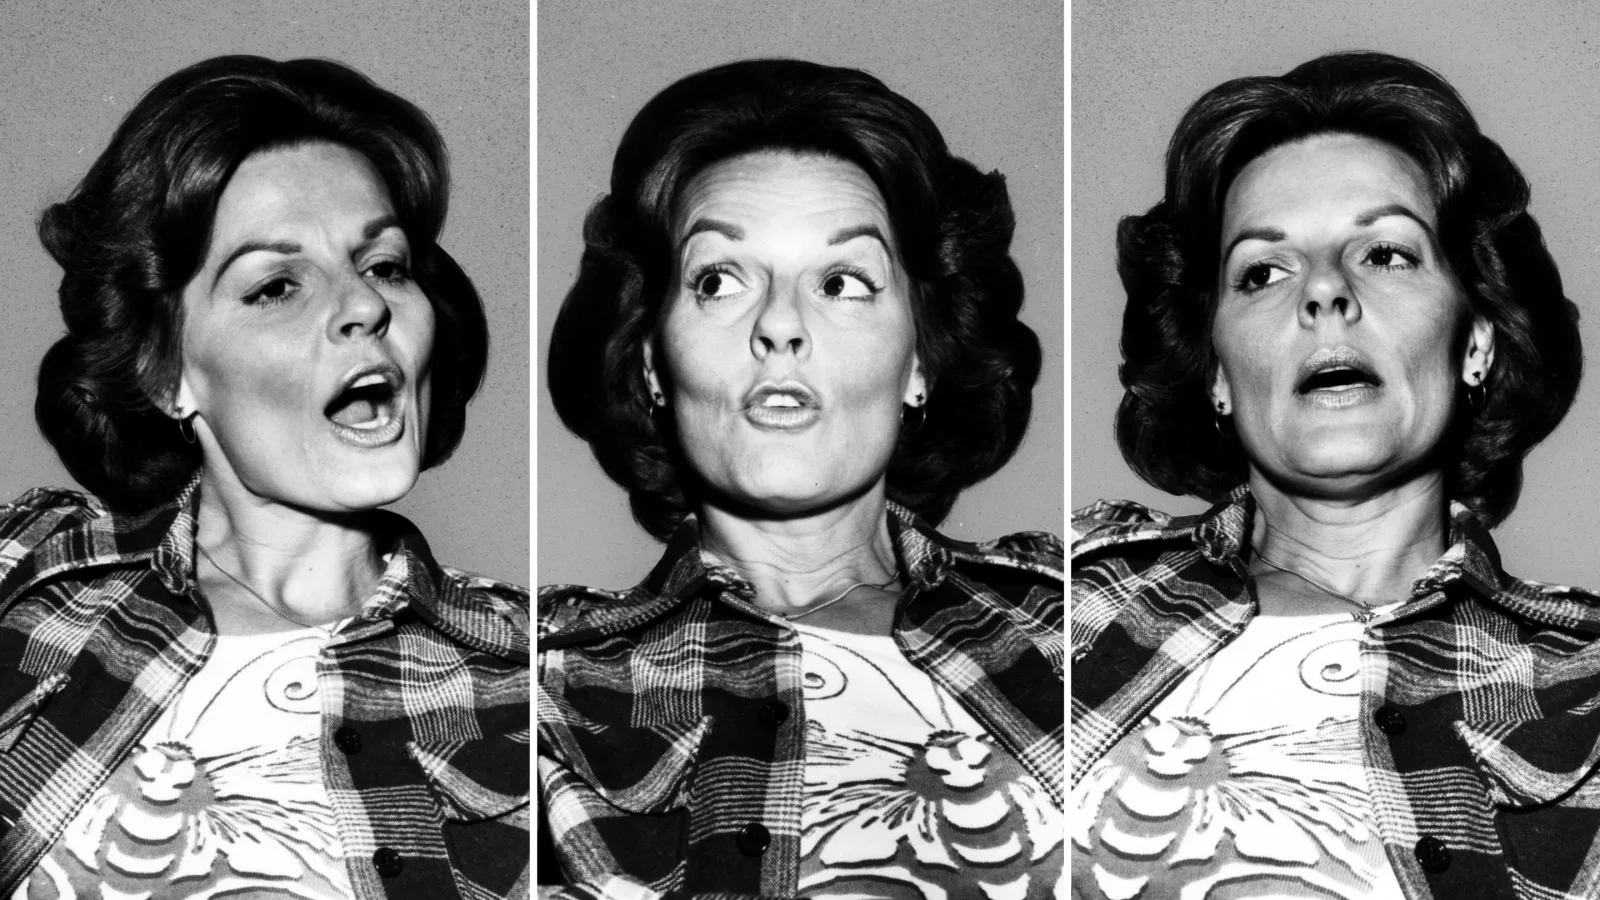 Blackmail Garny Anal Fuck - The Playboy Interview With Anita Bryant on Jews, Gays, Sex, Politics and  Orange Juice